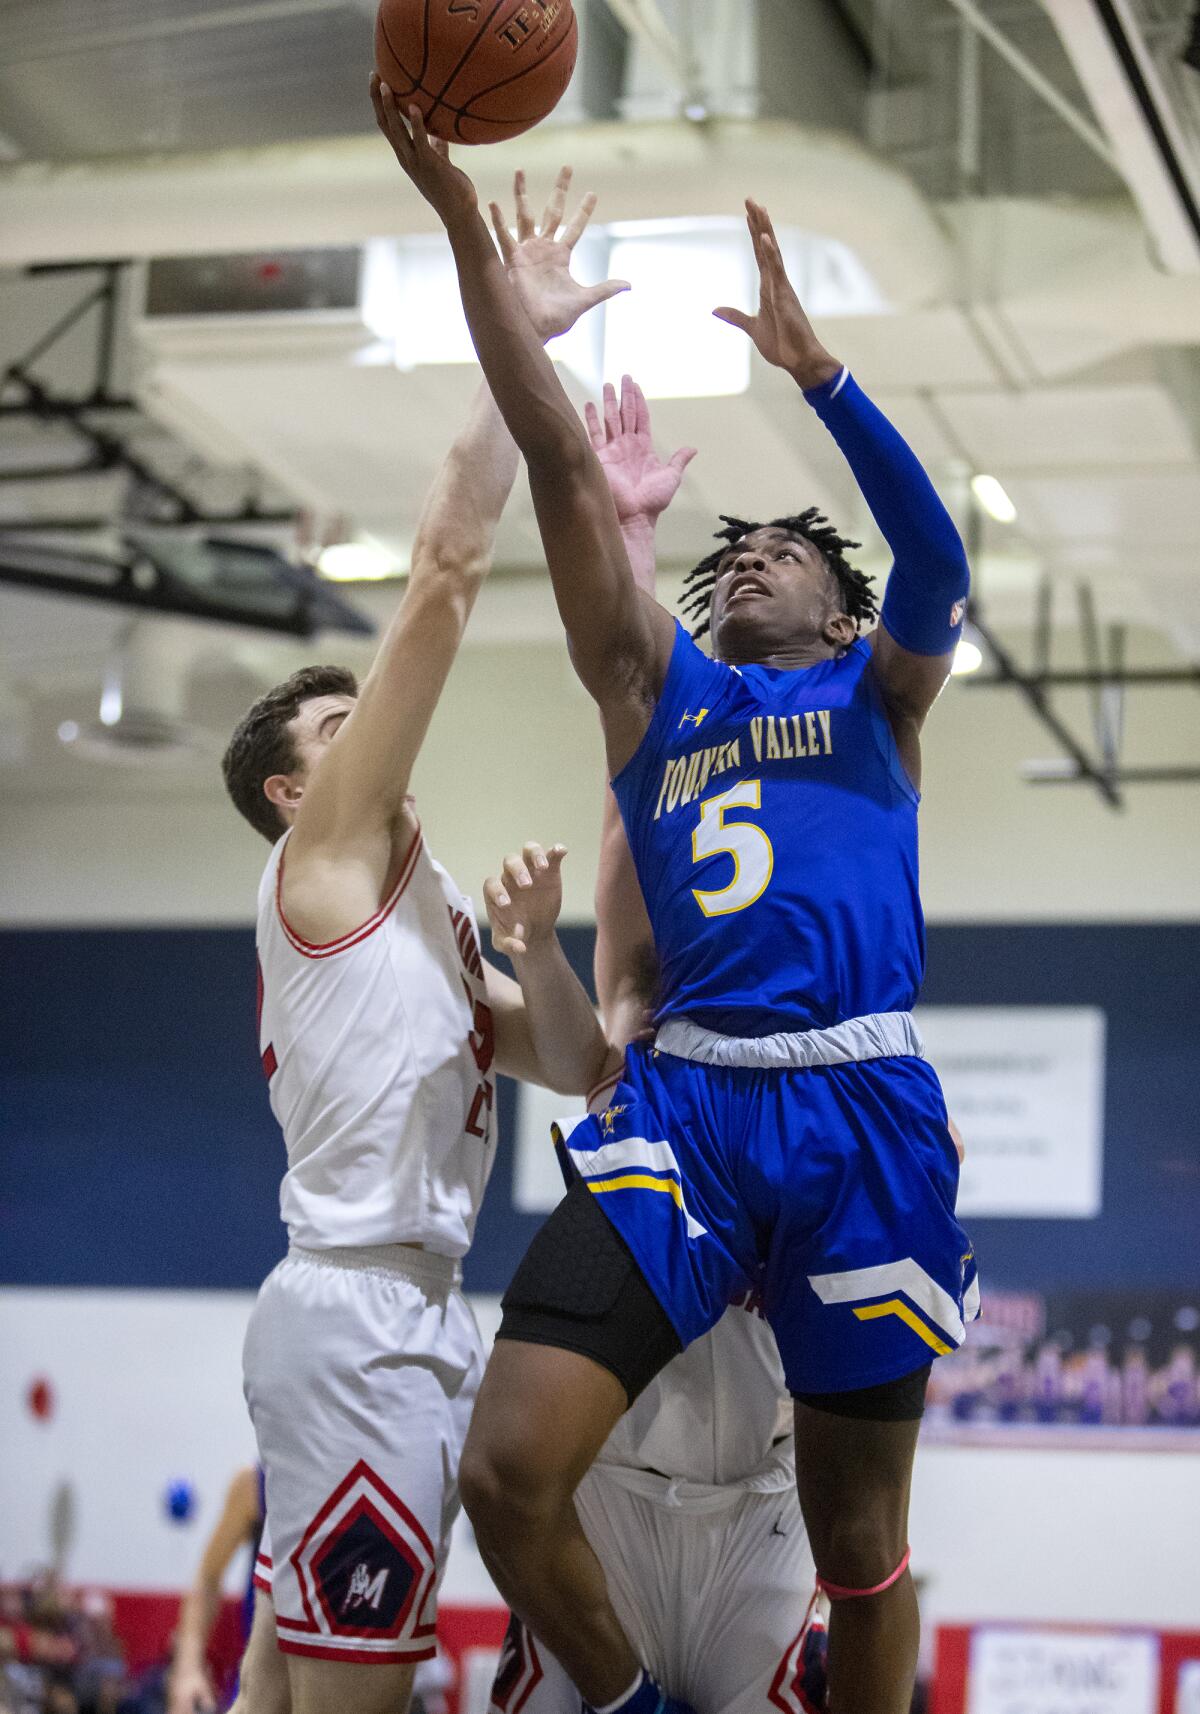 Fountain Valley's Jeremiah Davis (5) goes up for a shot against Yorba Linda's Alex Davis in the quarterfinals of the CIF Southern Section Division 3A playoffs on Tuesday.